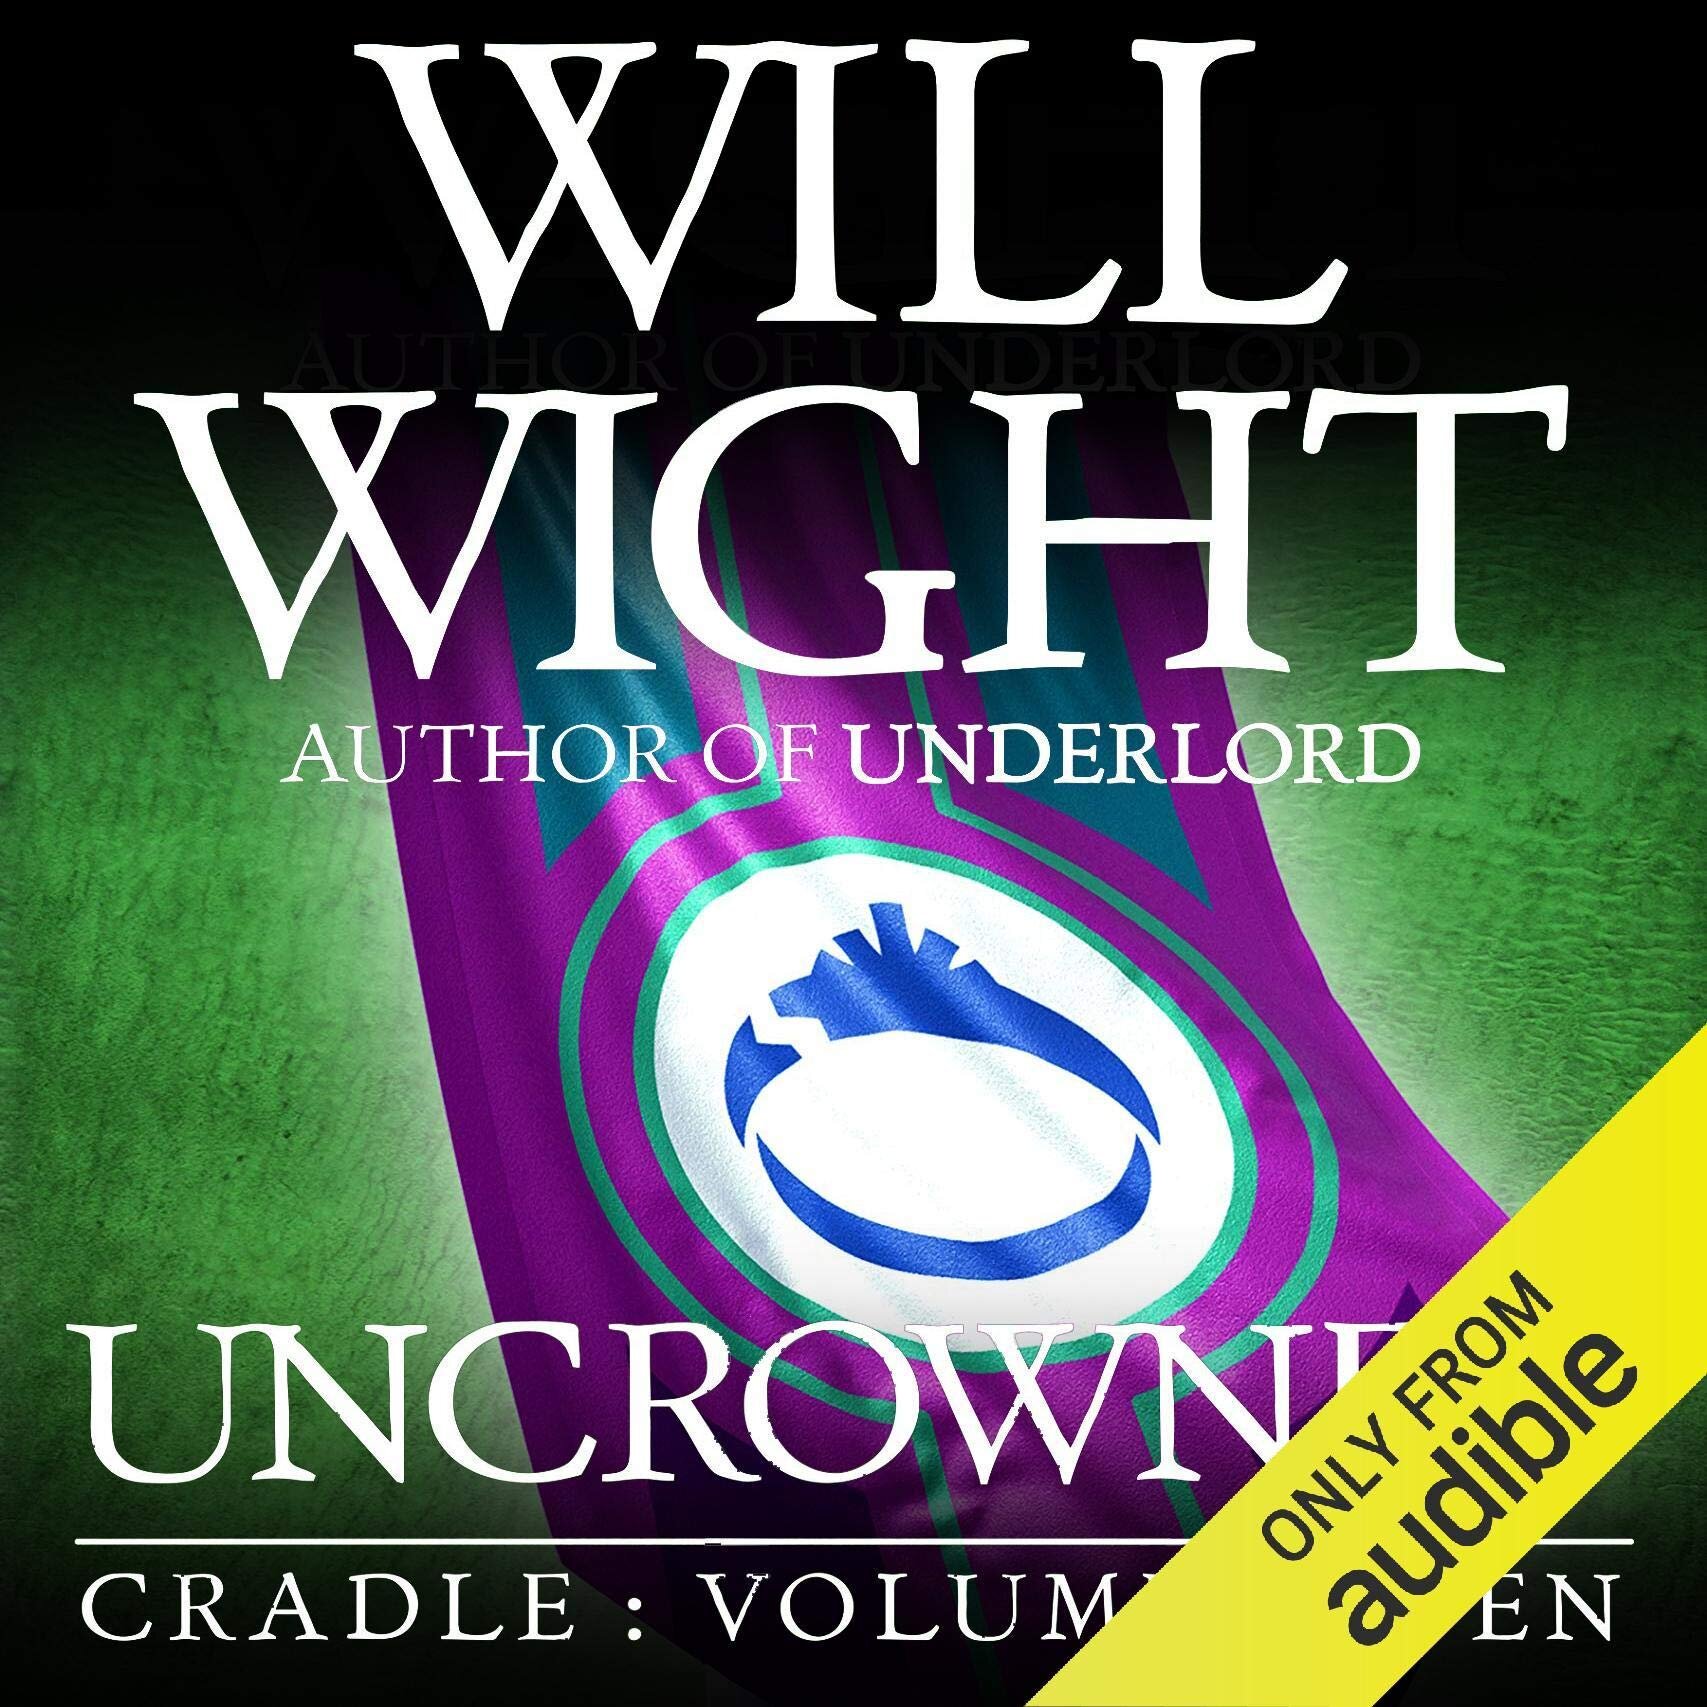 UNCROWNED BY WILL WIGHT PUBLISHED HIDDEN GNOME PUBLISHING SEPTEMBER 26, 2019 KINDLE B07X8ZH6BS AUDIBLE B07XTPSFPY